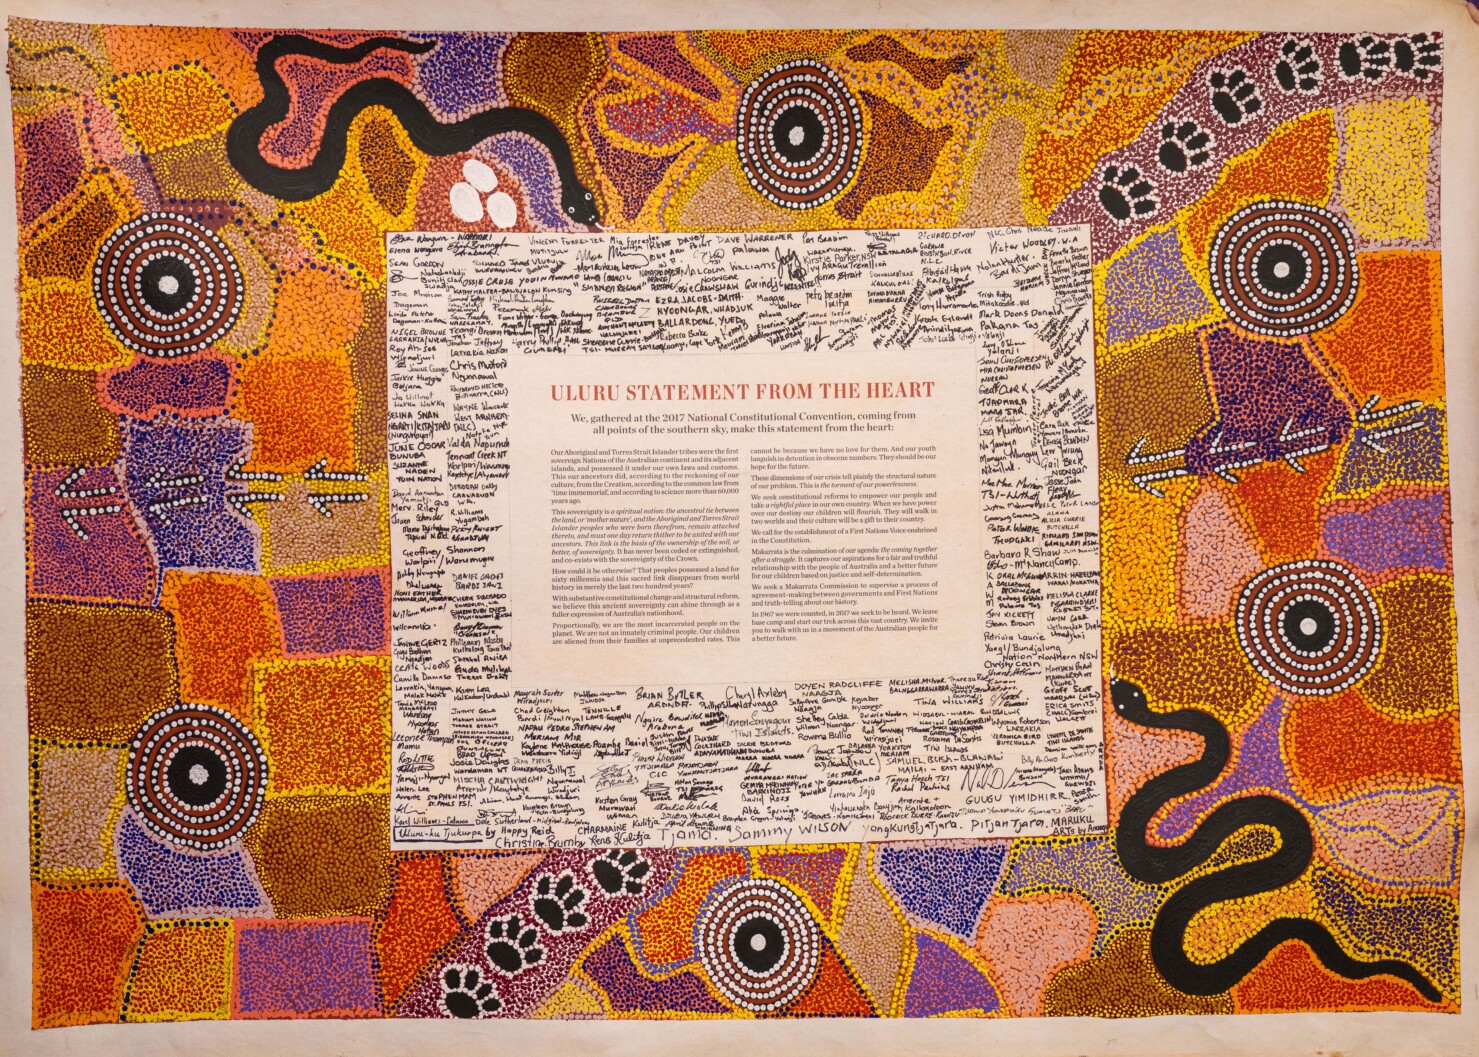 ULURU STATEMENT FROM THE HEART surrounded by dot artwork and signed by First Nations and with the following words. "We, gathered at the 2017 National Constitutional Convention, coming from all points of the southern sky, make this statement from the heart: Our Aboriginal and Torres Strait Islander tribes were the first sovereign Nations of the Australian continent and its adjacent islands, and possessed it under our own laws and customs. This our ancestors did, according to the reckoning of our culture, from the Creation, according to the common law from ‘time immemorial’, and according to science more than 60,000 years ago. This sovereignty is a spiritual notion: the ancestral tie between the land, or ‘mother nature’, and the Aboriginal and Torres Strait Islander peoples who were born therefrom, remain attached thereto, and must one day return thither to be united with our ancestors. This link is the basis of the ownership of the soil, or better, of sovereignty. It has never been ceded or extinguished, and co-exists with the sovereignty of the Crown. How could it be otherwise? That peoples possessed a land for sixty millennia and this sacred link disappears from world history in merely the last two hundred years? With substantive constitutional change and structural reform, we believe this ancient sovereignty can shine through as a fuller expression of Australia’s nationhood. Proportionally, we are the most incarcerated people on the planet. We are not an innately criminal people. Our children are aliened from their families at unprecedented rates. This cannot be because we have no love for them. And our youth languish in detention in obscene numbers. They should be our hope for the future. These dimensions of our crisis tell plainly the structural nature of our problem. This is the torment of our powerlessness. We seek constitutional reforms to empower our people and take a rightful place in our own country. When we have power over our destiny our children will flourish. They will walk in two worlds and their culture will be a gift to their country. We call for the establishment of a First Nations Voice enshrined in the Constitution. Makarrata is the culmination of our agenda: the coming together after a struggle. It captures our aspirations for a fair and truthful relationship with the people of Australia and a better future for our children based on justice and self-determination. We seek a Makarrata Commission to supervise a process of agreement-making between governments and First Nations and truth-telling about our history. In 1967 we were counted, in 2017 we seek to be heard. We leave base camp and start our trek across this vast country. We invite you to walk with us in a movement of the Australian people for a better future."